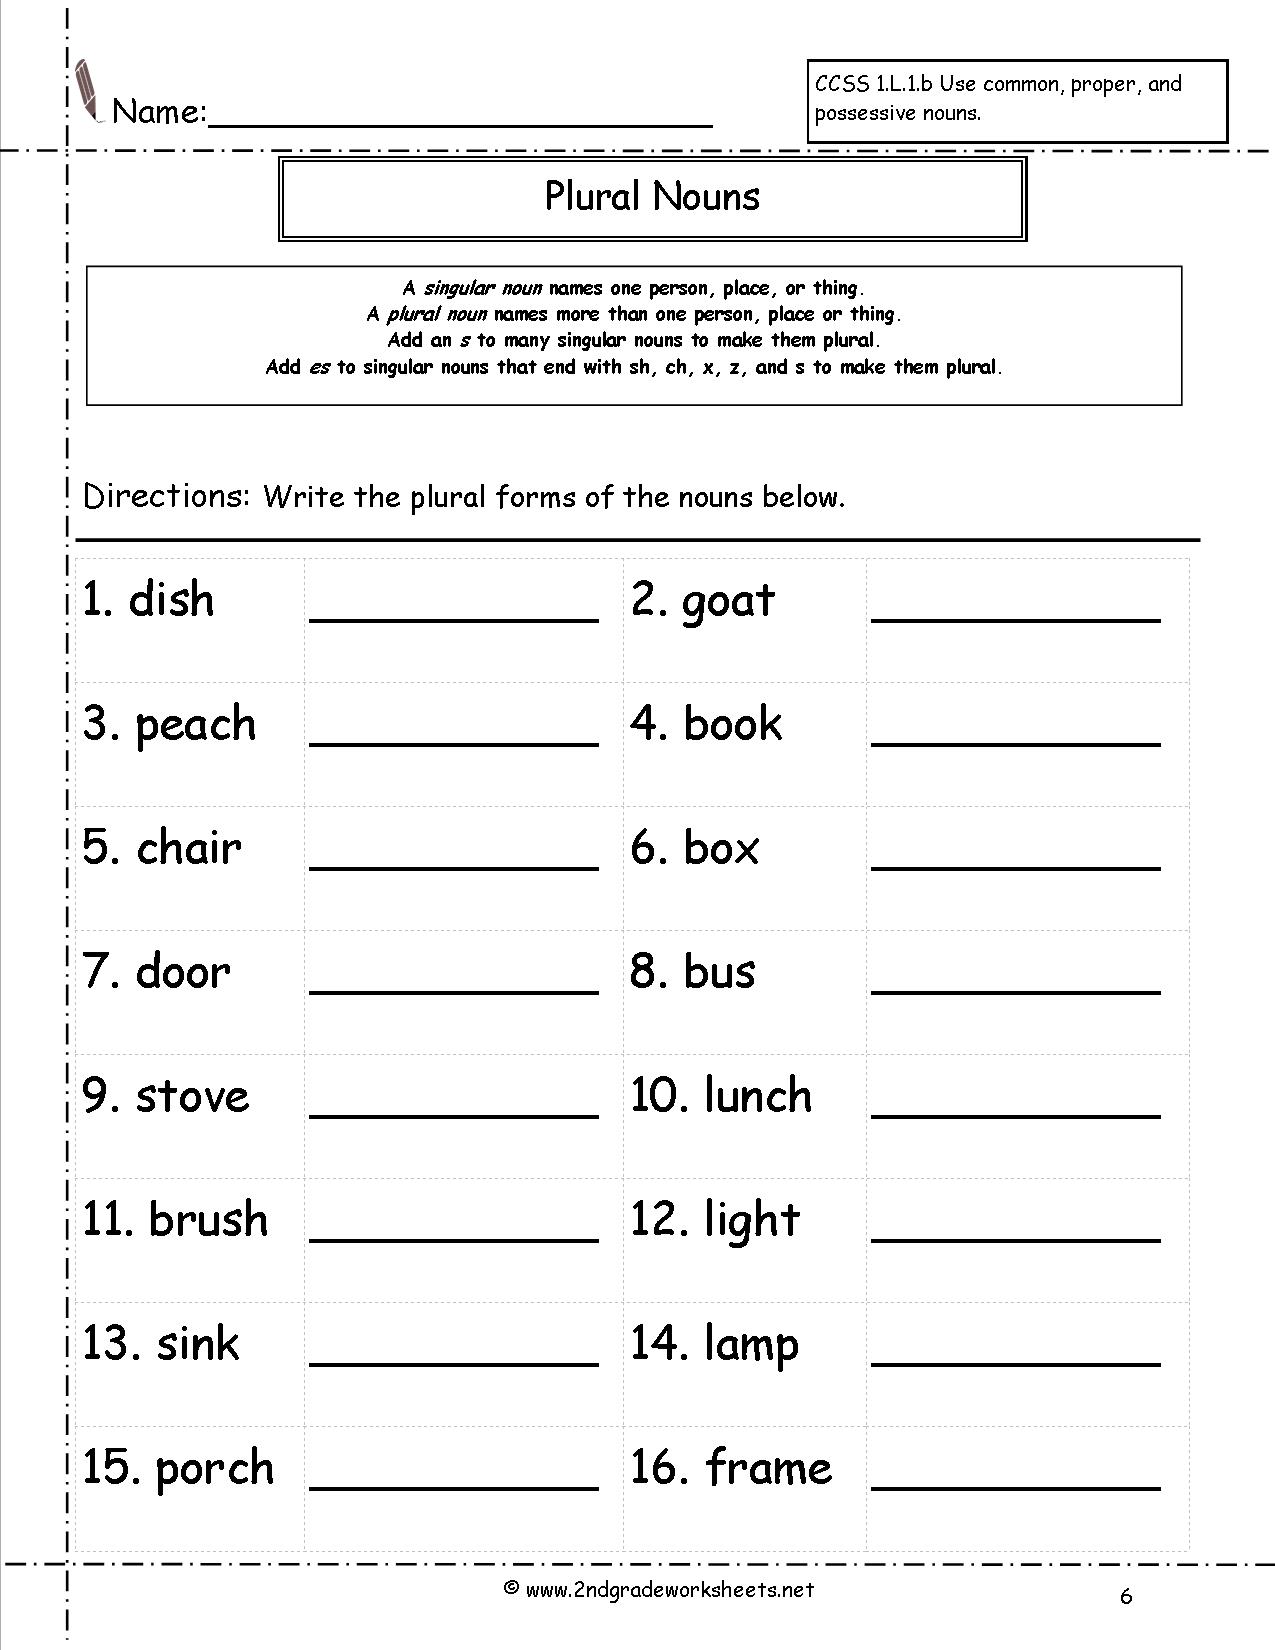 17-best-images-of-nouns-verbs-adjectives-worksheets-1st-grade-haunted